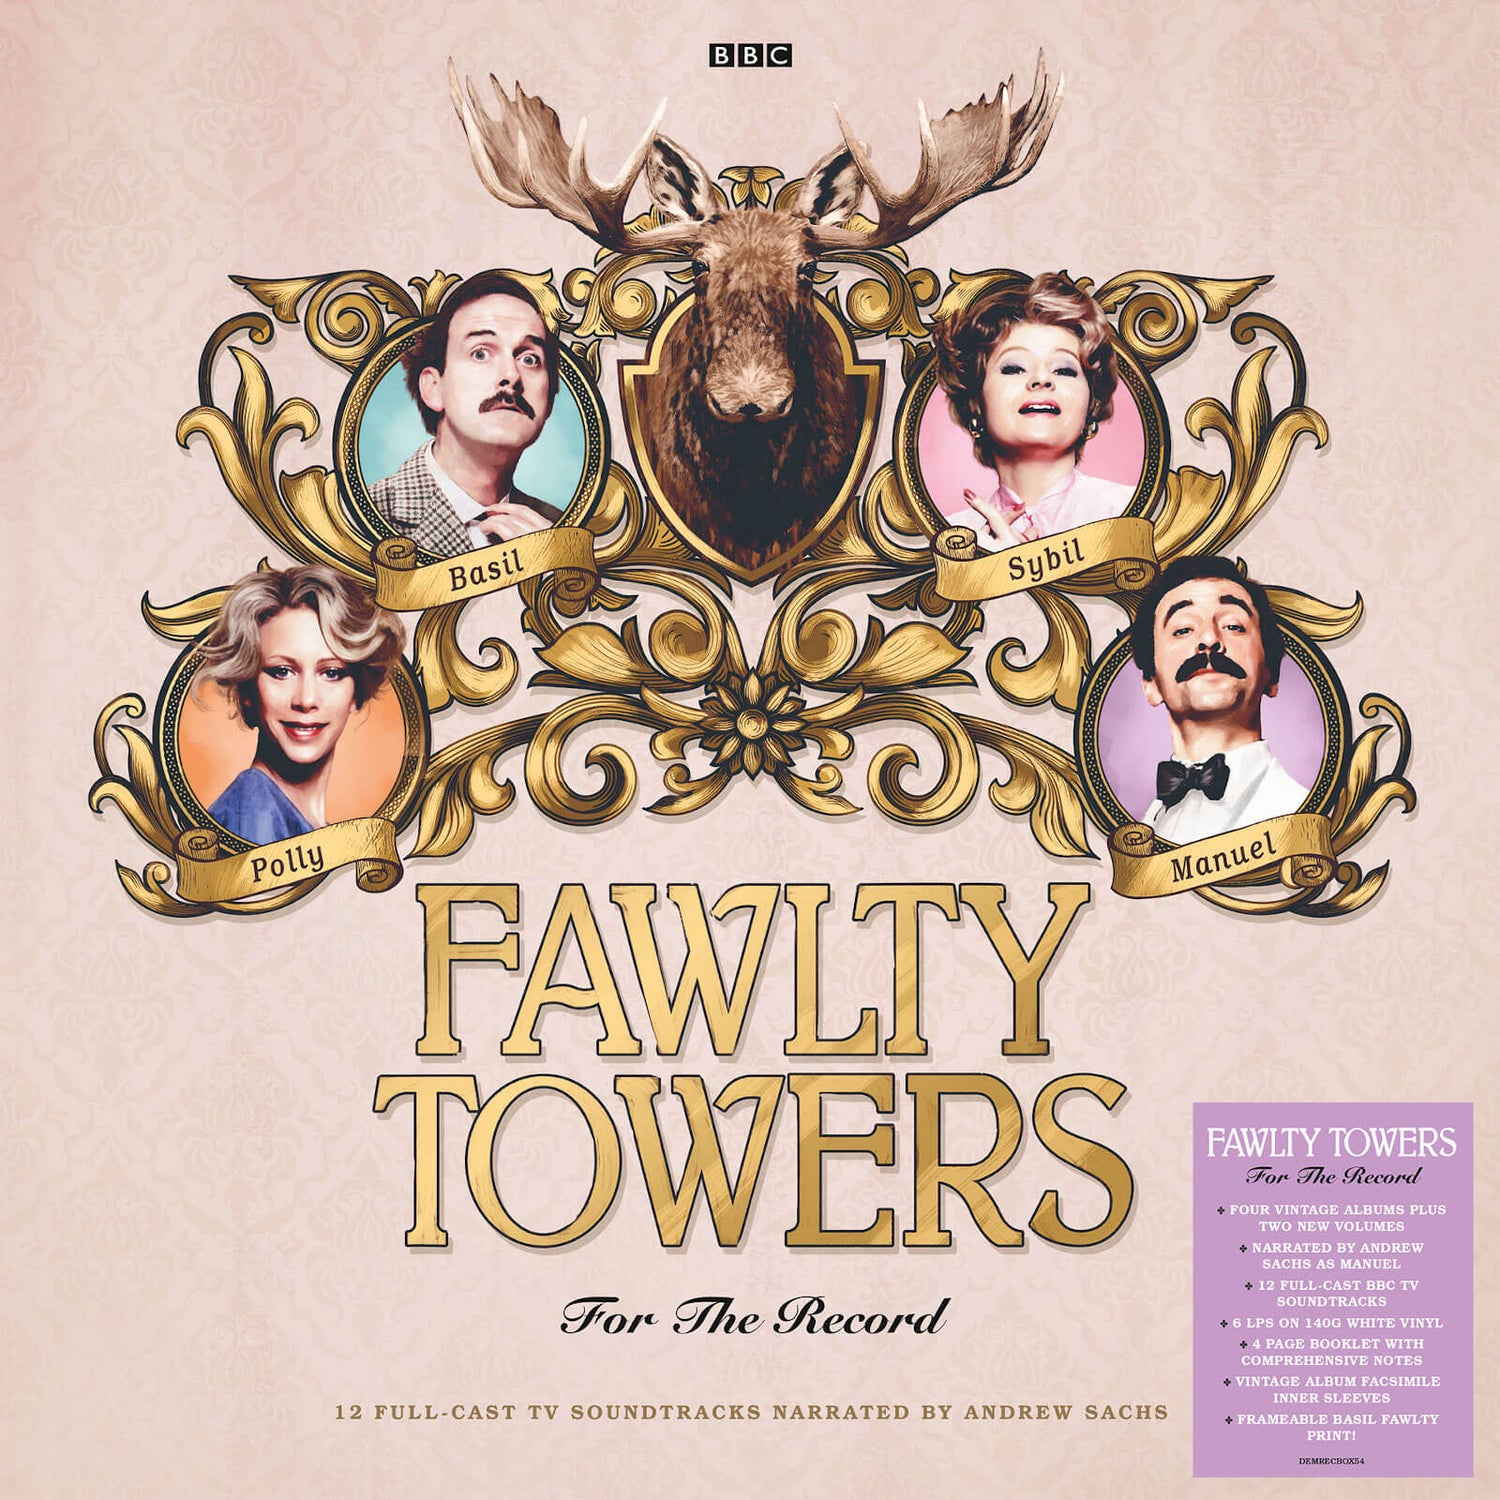 Fawlty Towers: For The Record - Vinyl Box Set (Signed Edition)